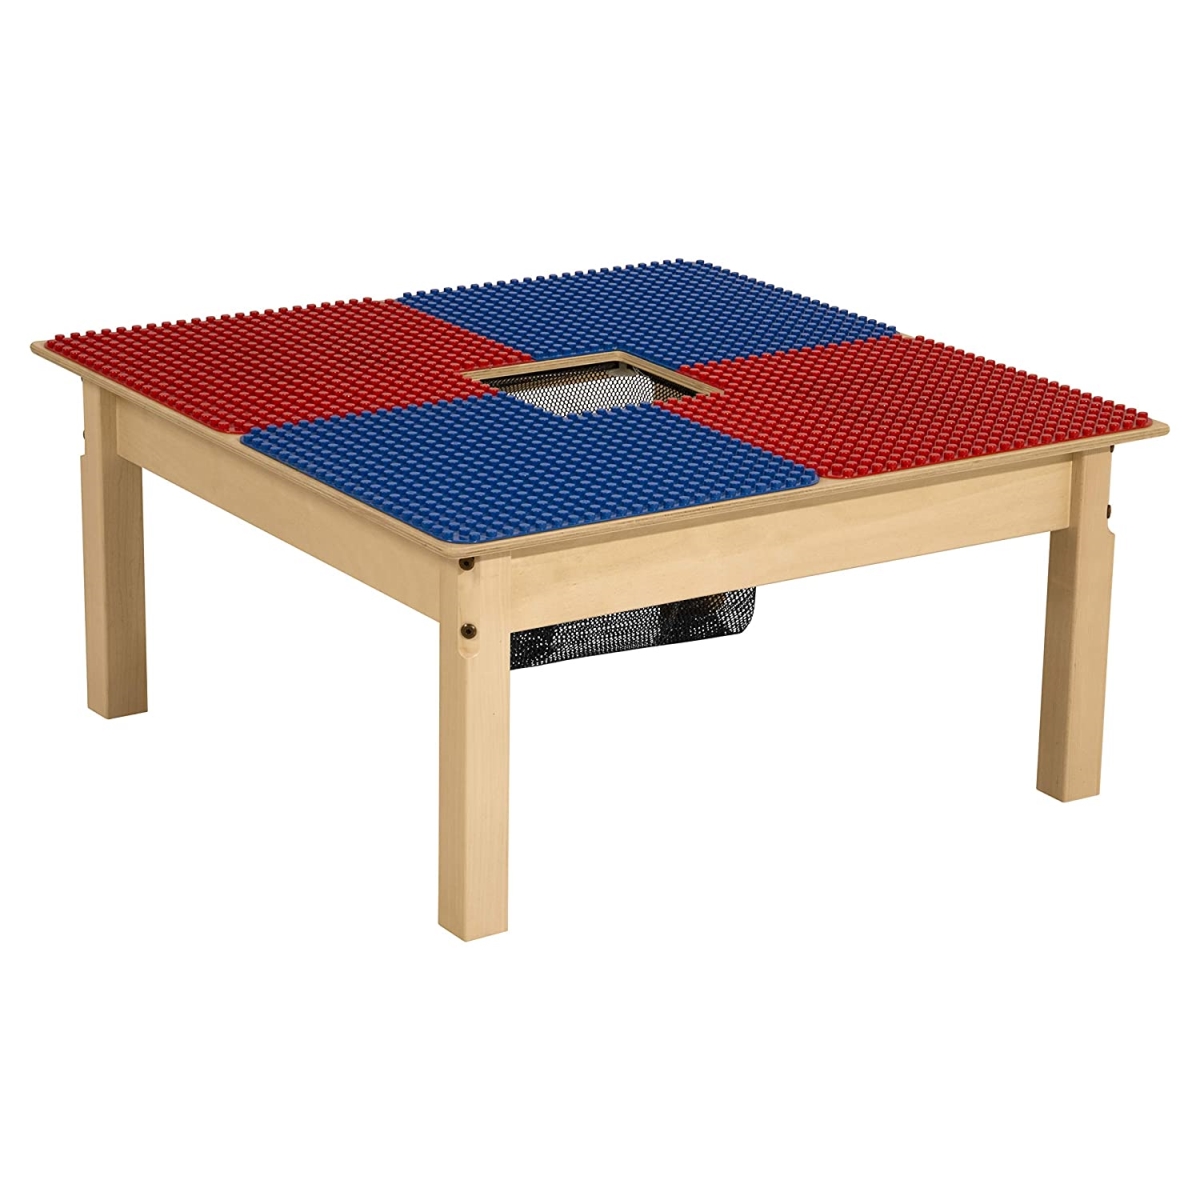 Tp3131pgn16-br 16 In. Duplo Compatible Table With Legs, Blue & Red - Square